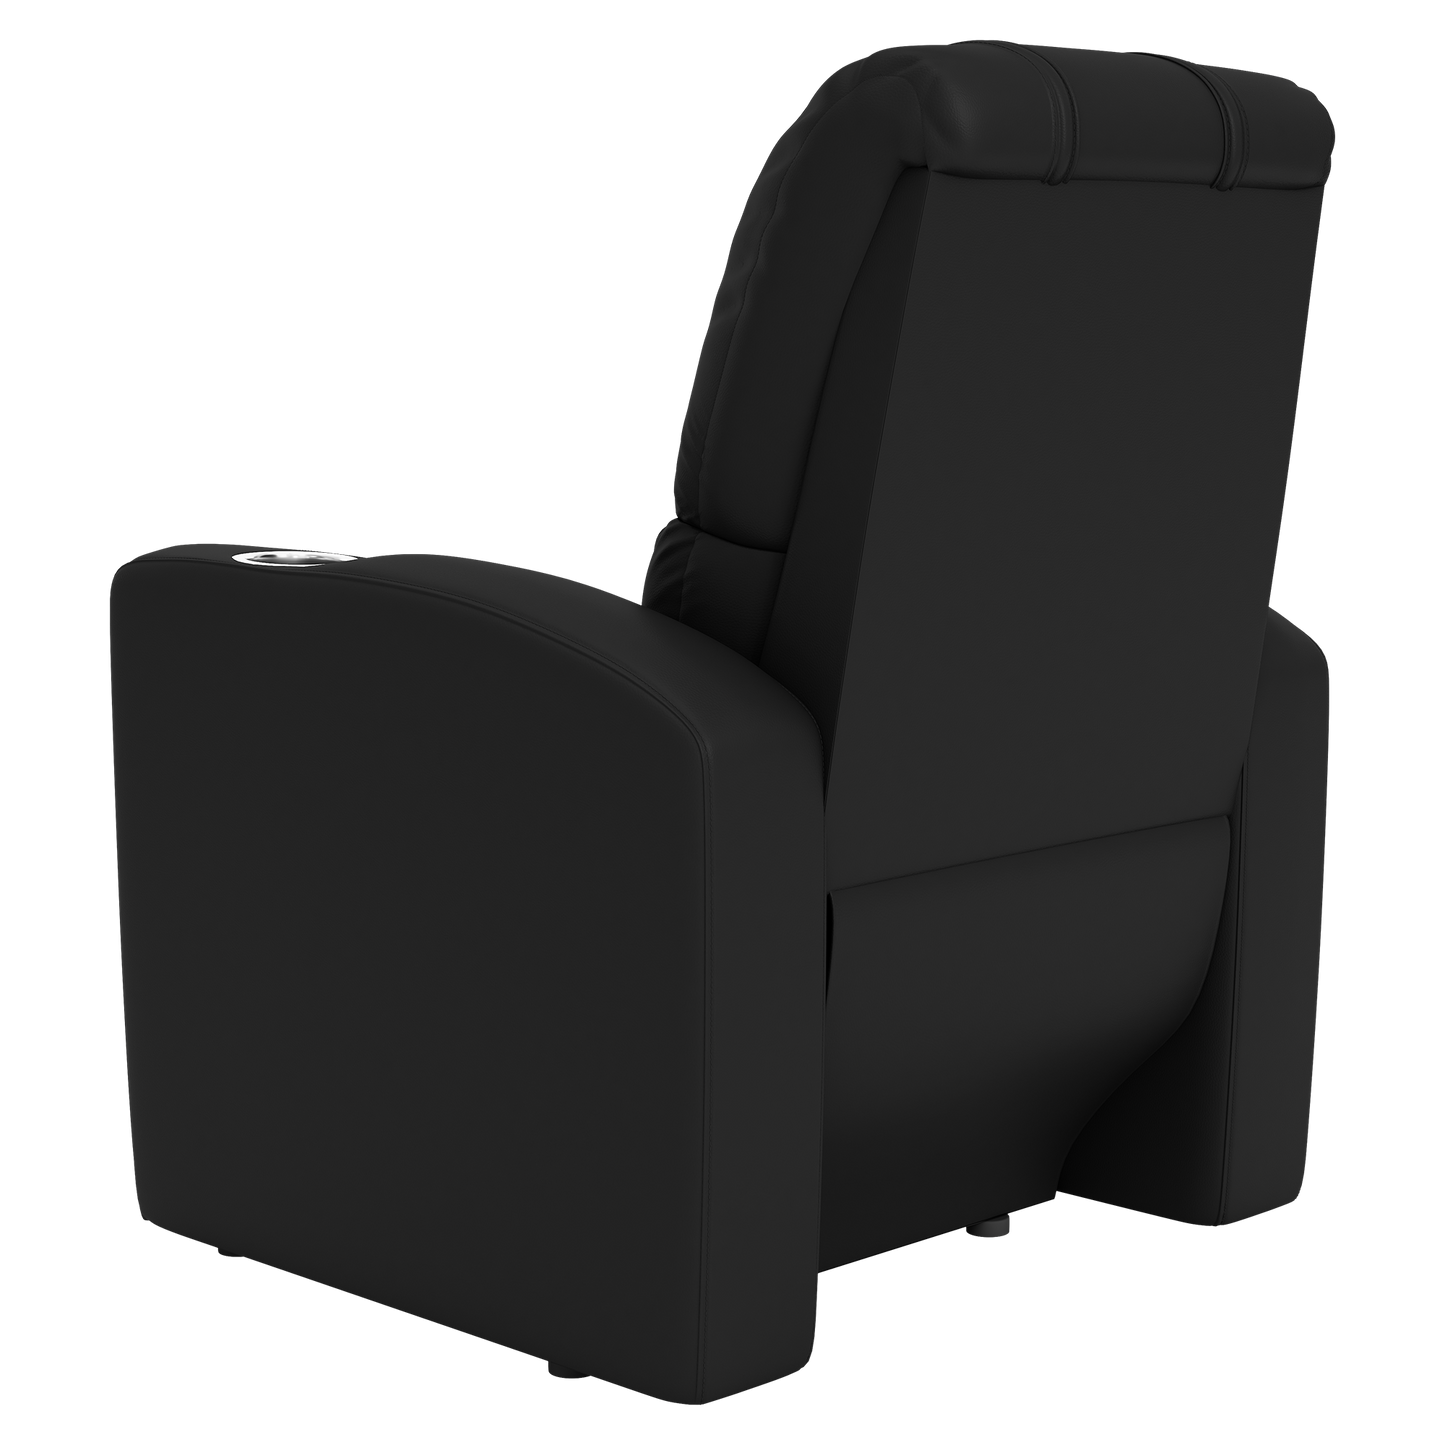 Stealth Recliner with Minnesota United FC Logo